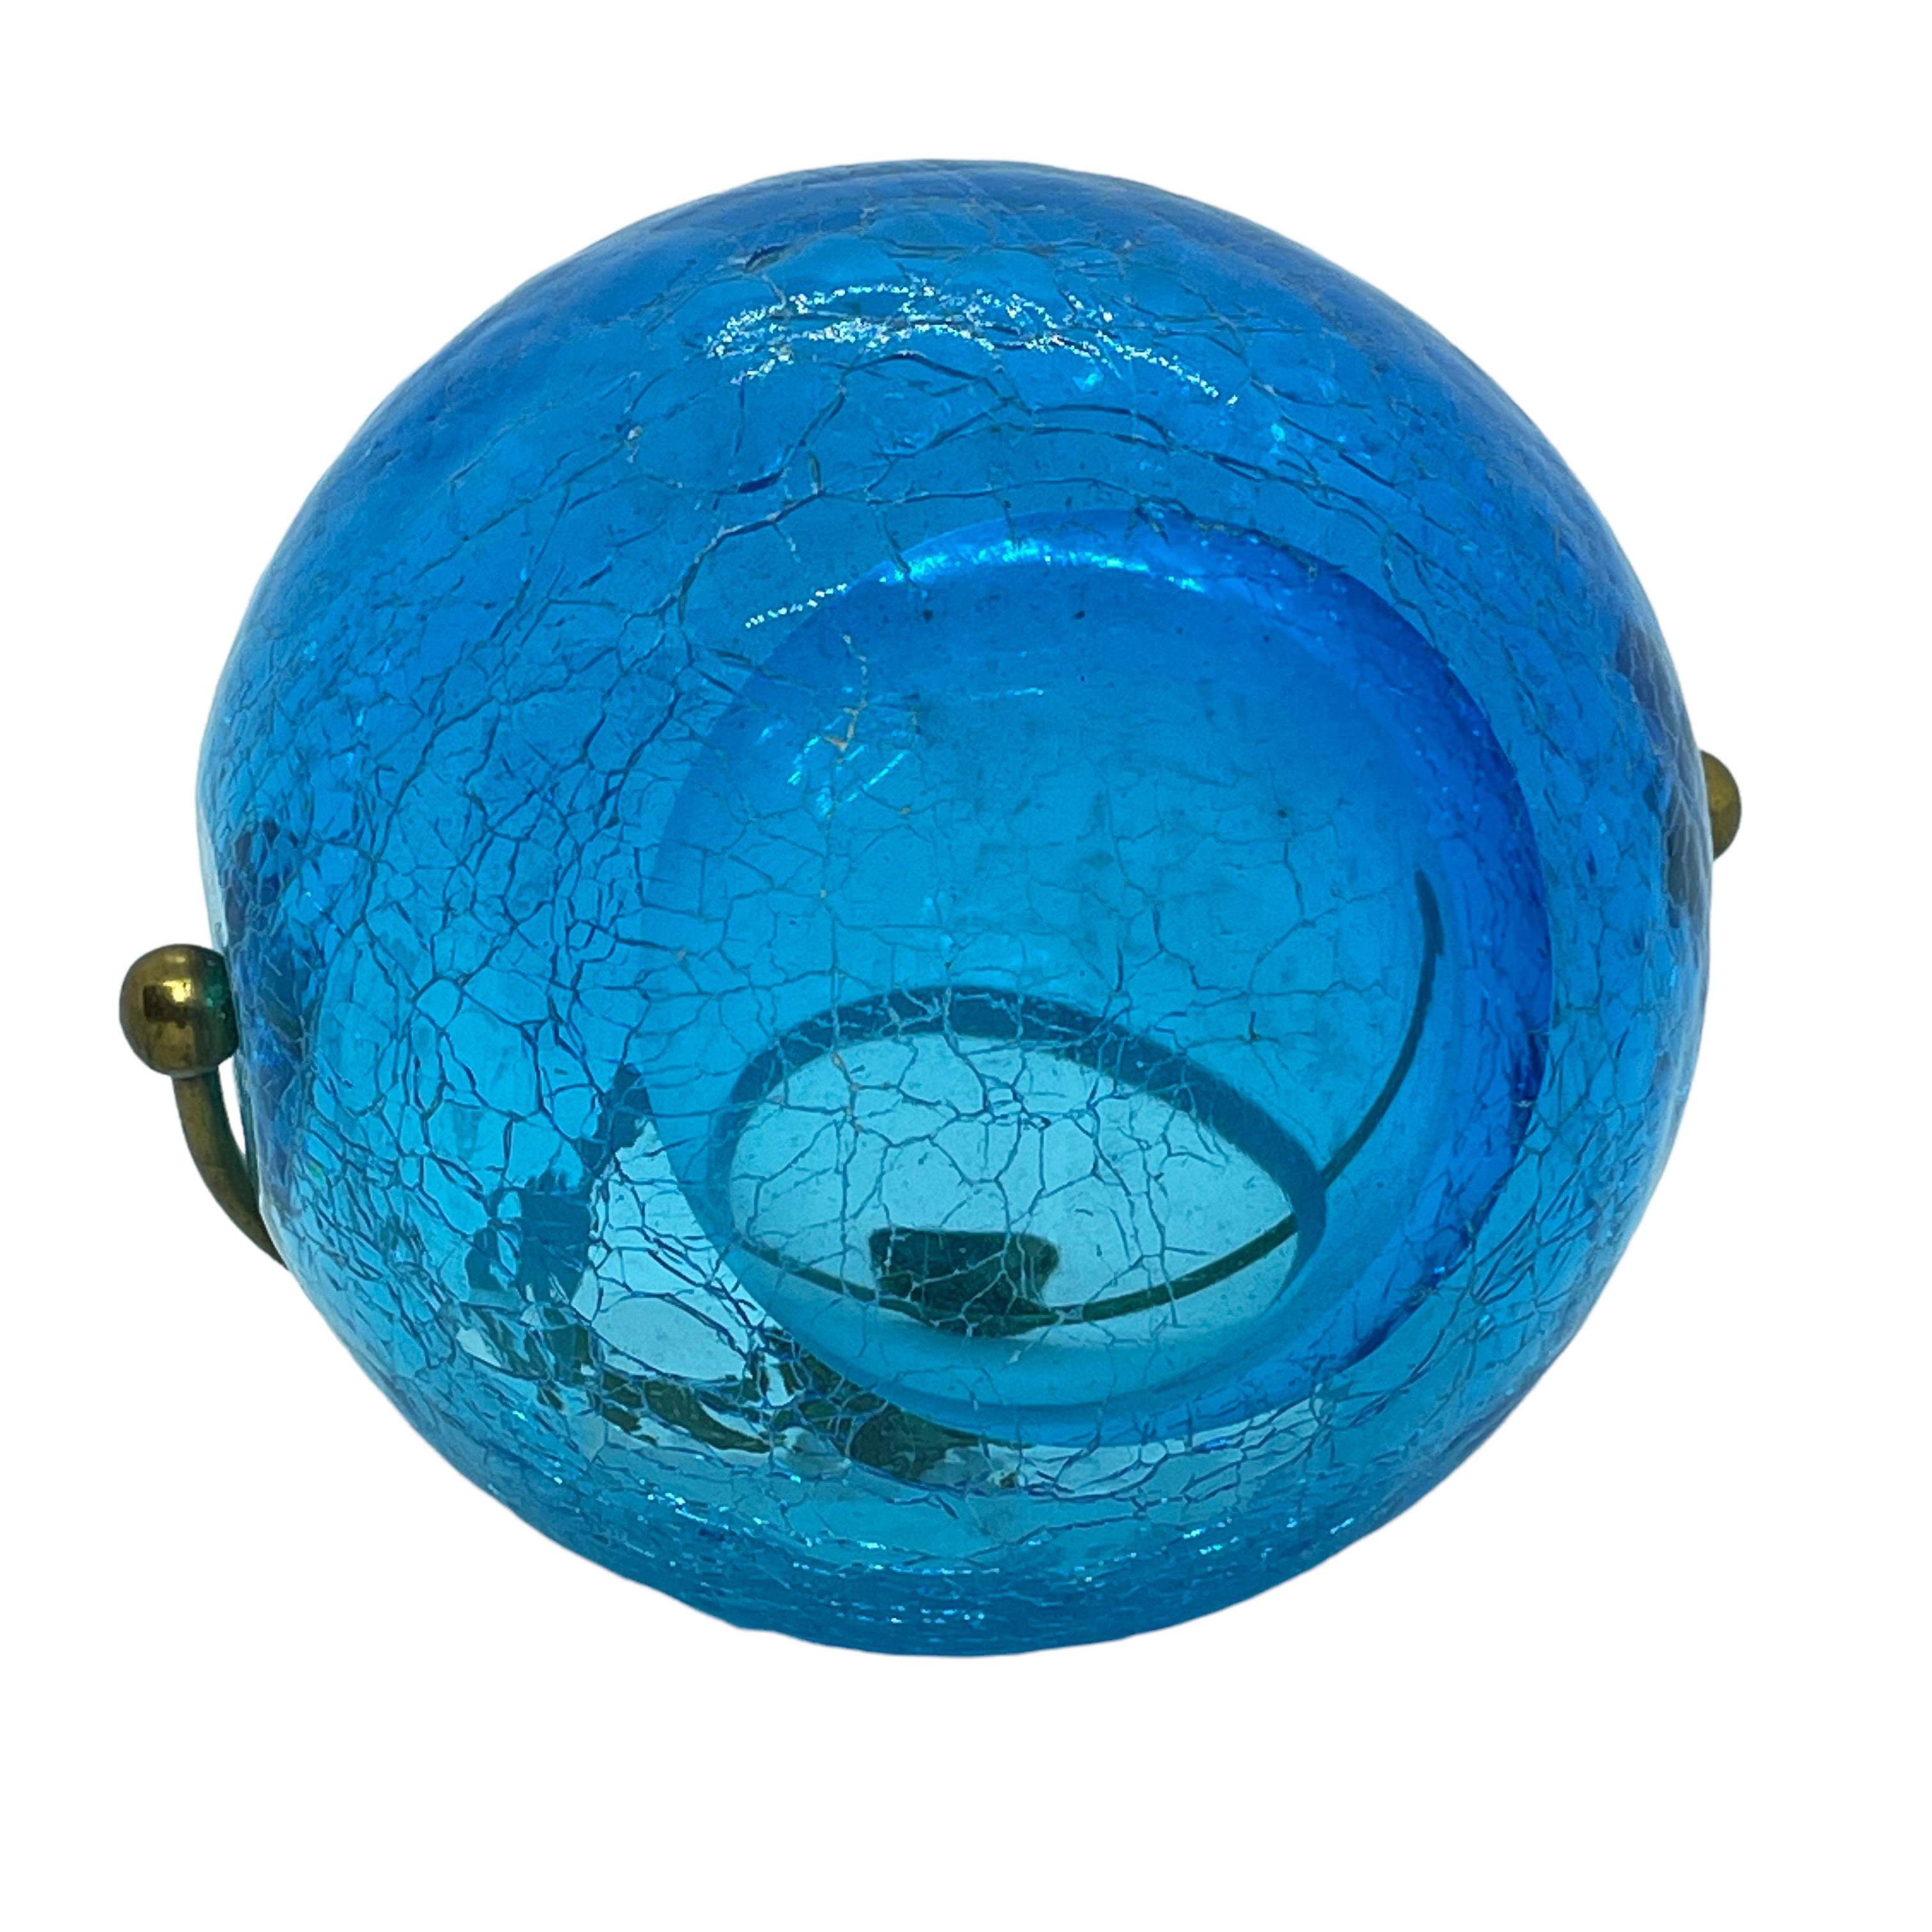 20th Century Turquoise and Brass Crystal Glass Ball Ash Tray, German, 1950s For Sale